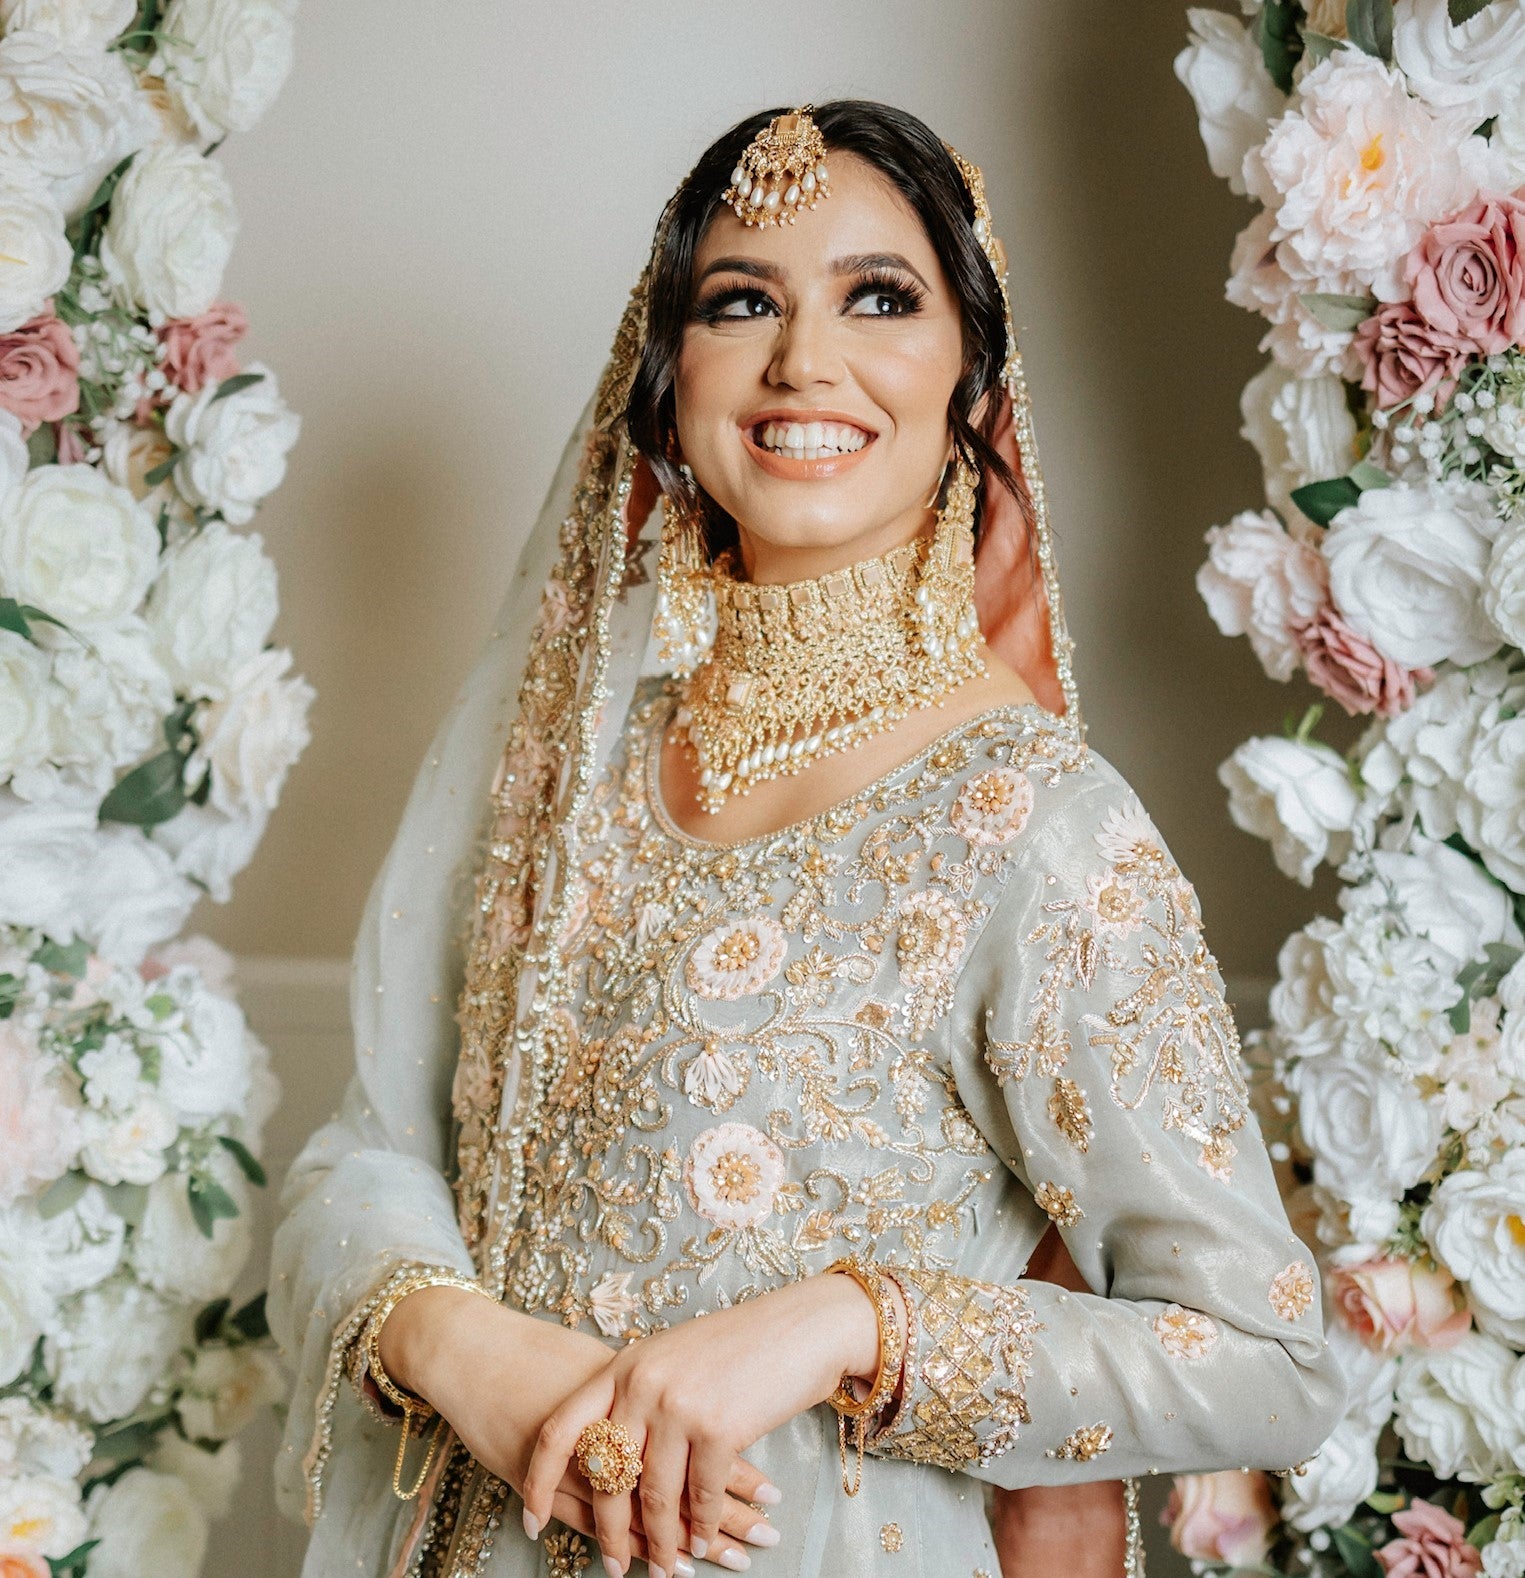 How much does a Pakistani bridal dress cost?